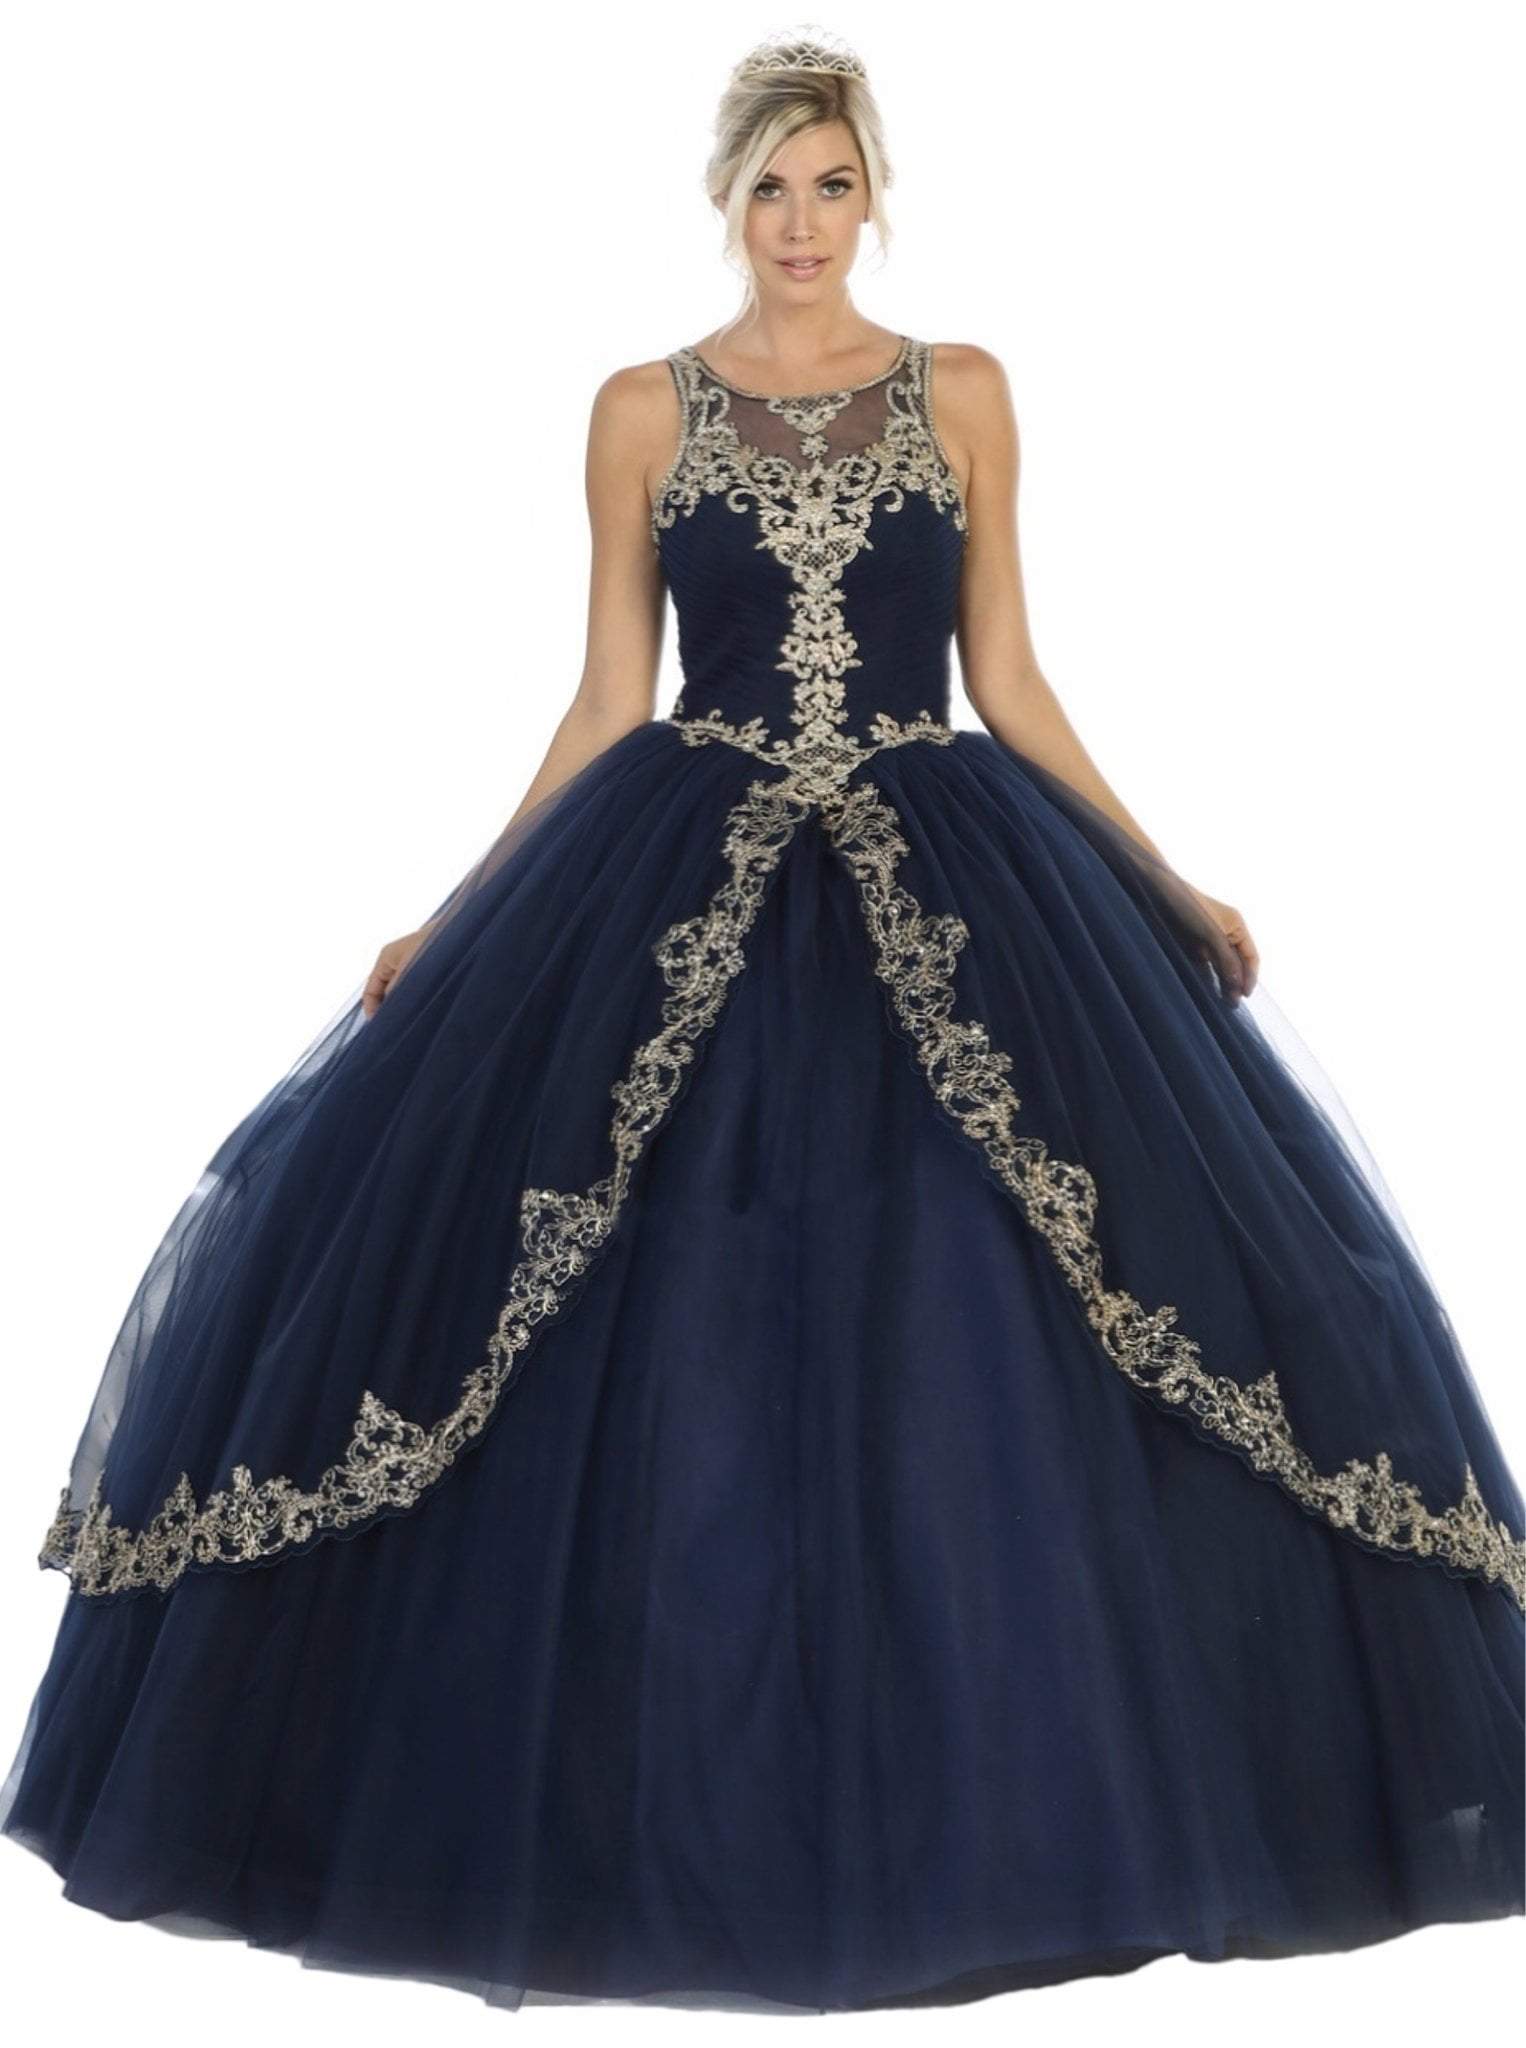 May Queen - LK117 Appliqued Scoop Pleated Ballgown
